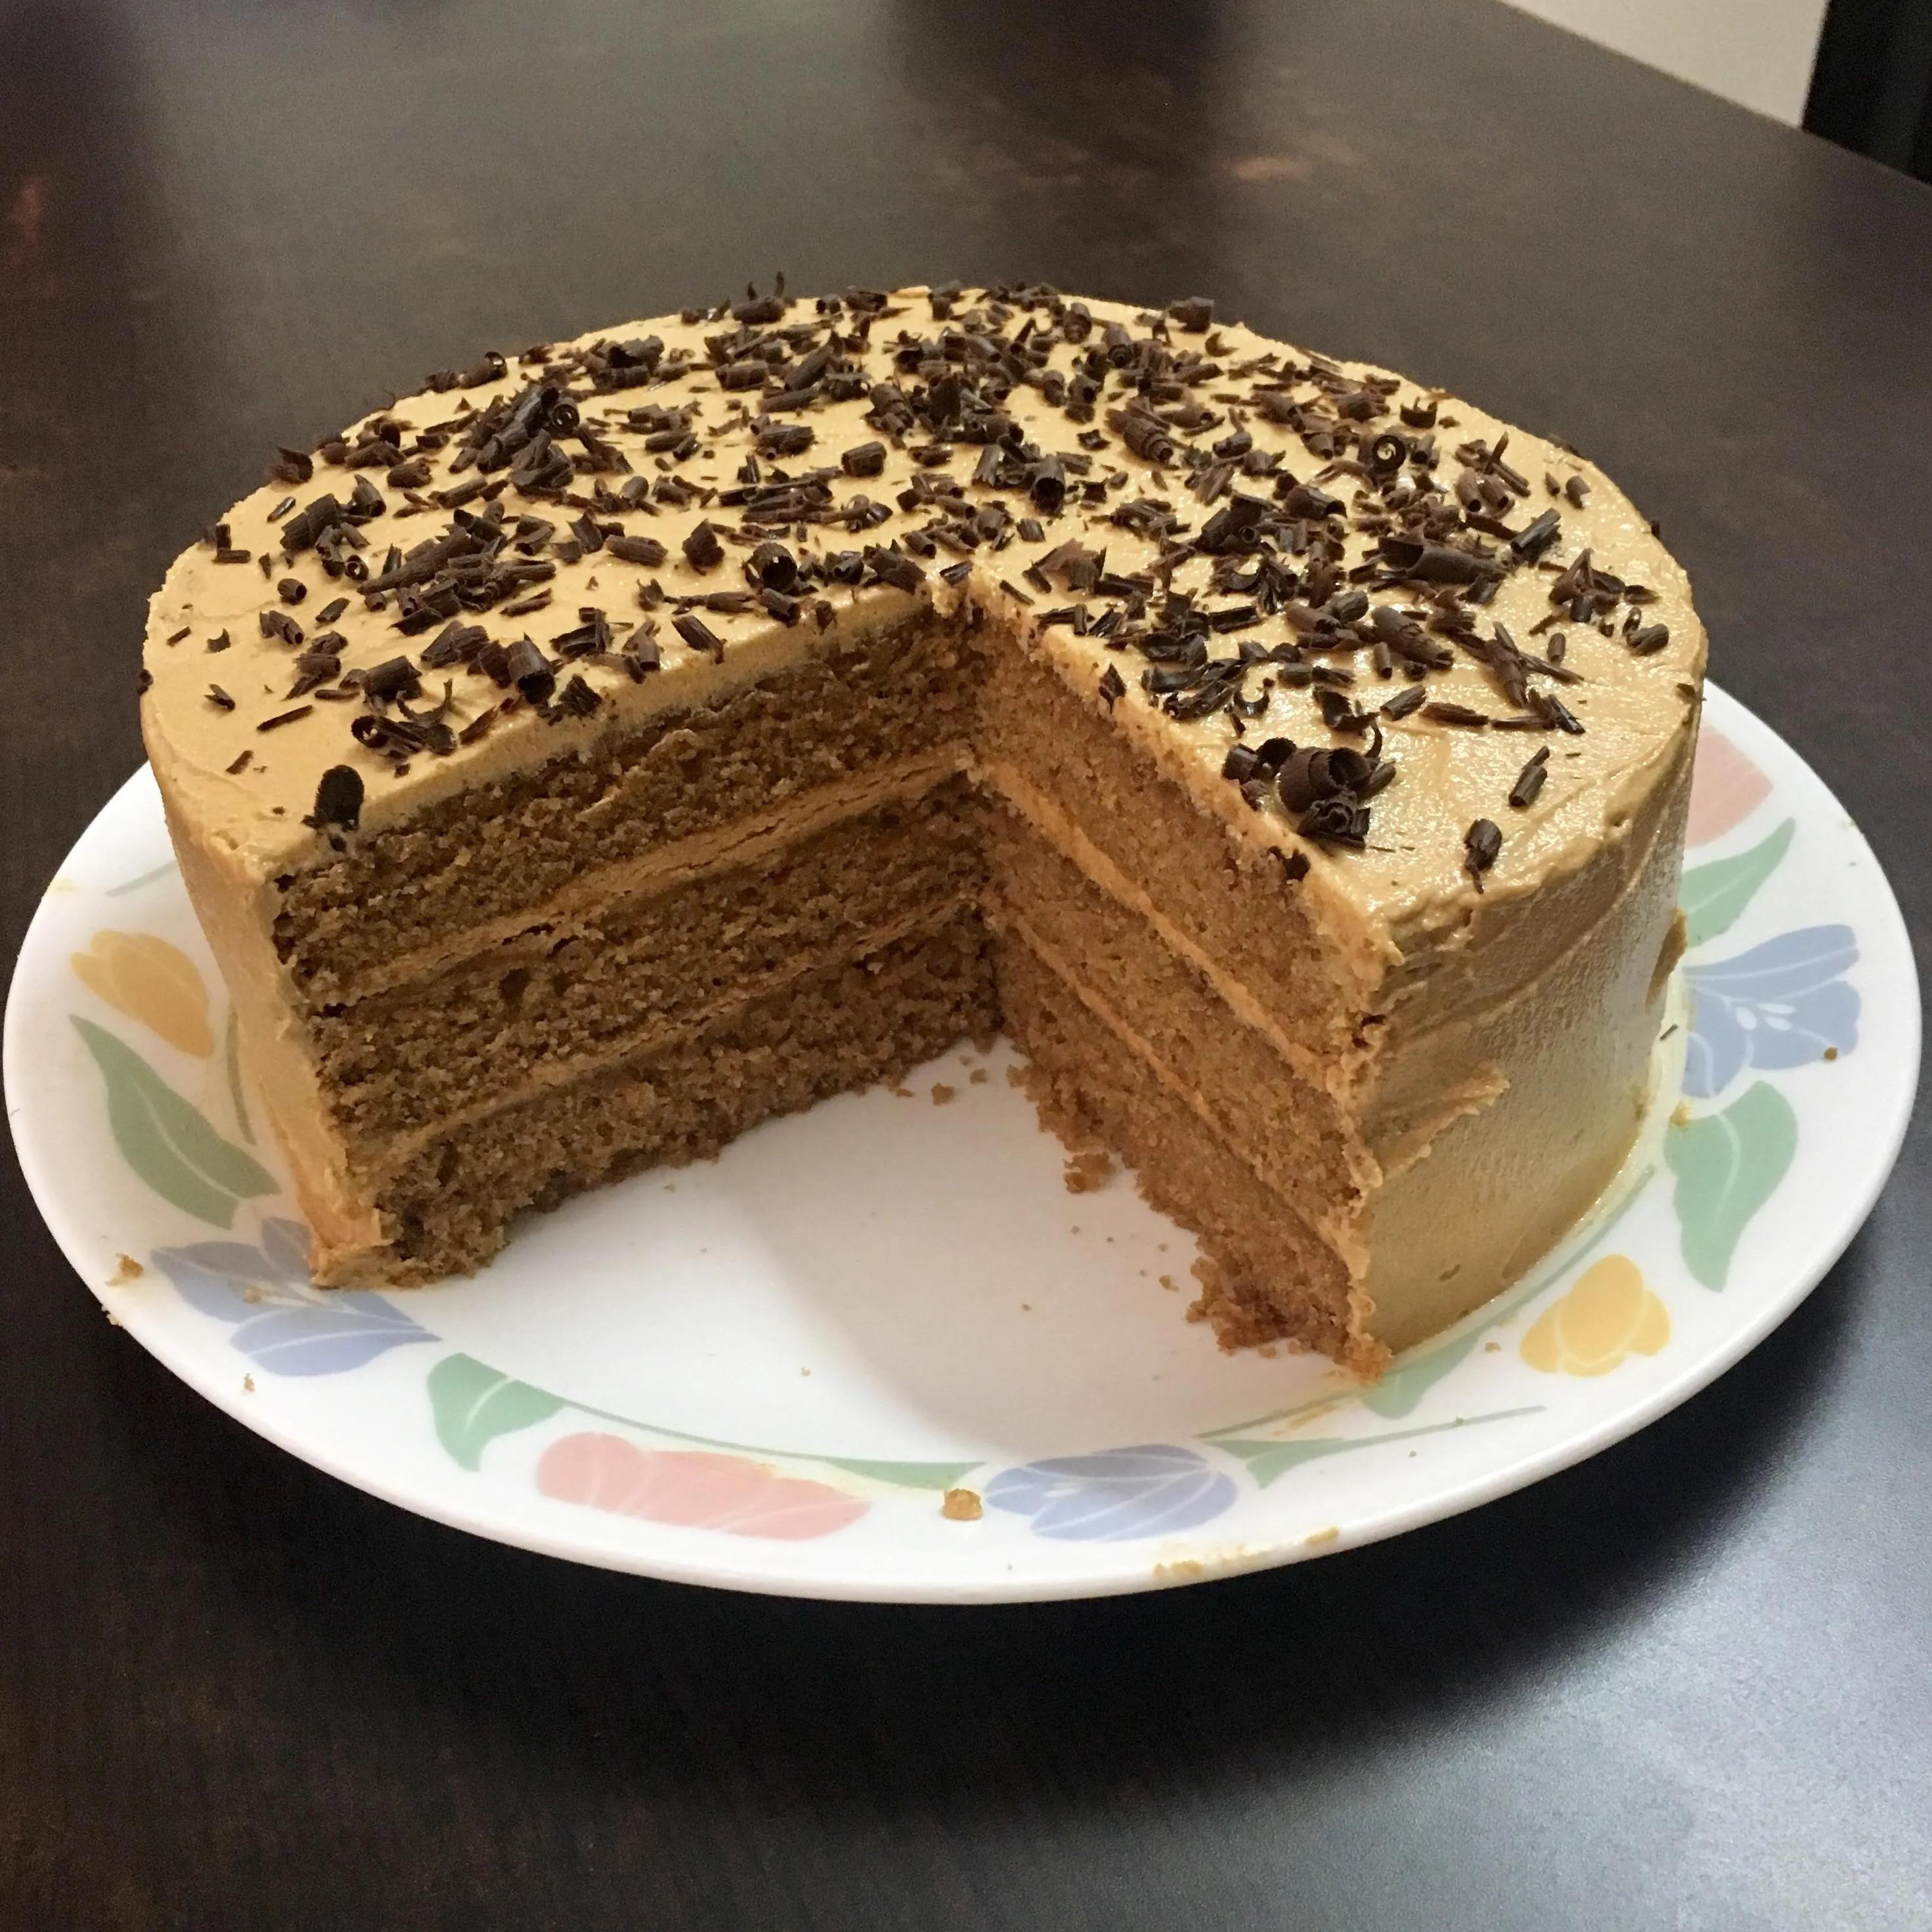 I made Coffee Cake for my birthday! : r/Baking